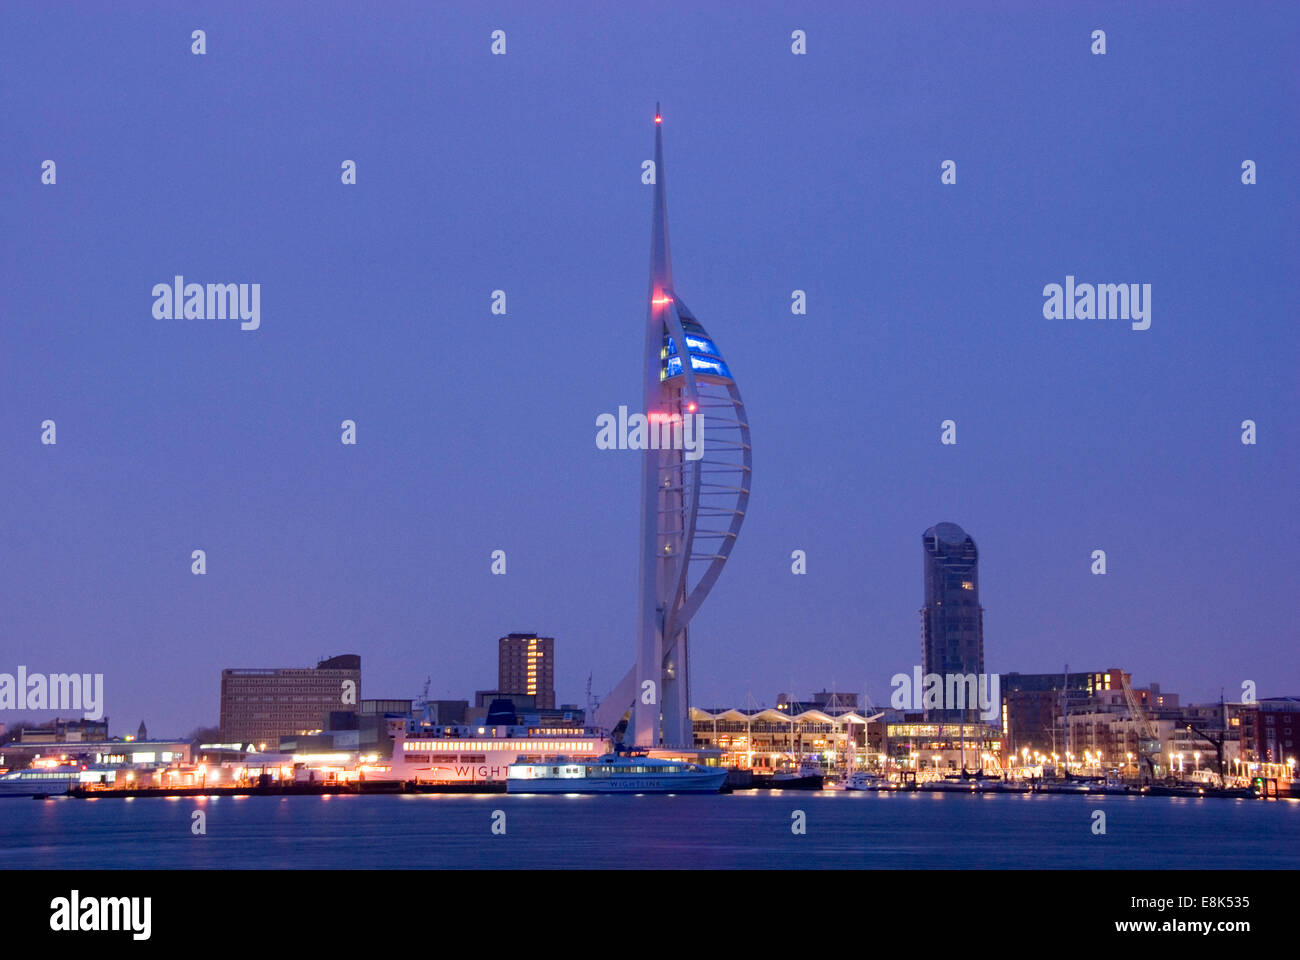 Portsmouth Harbour, UK 07 April 2013: the Spinnaker Tower lit up at night Stock Photo